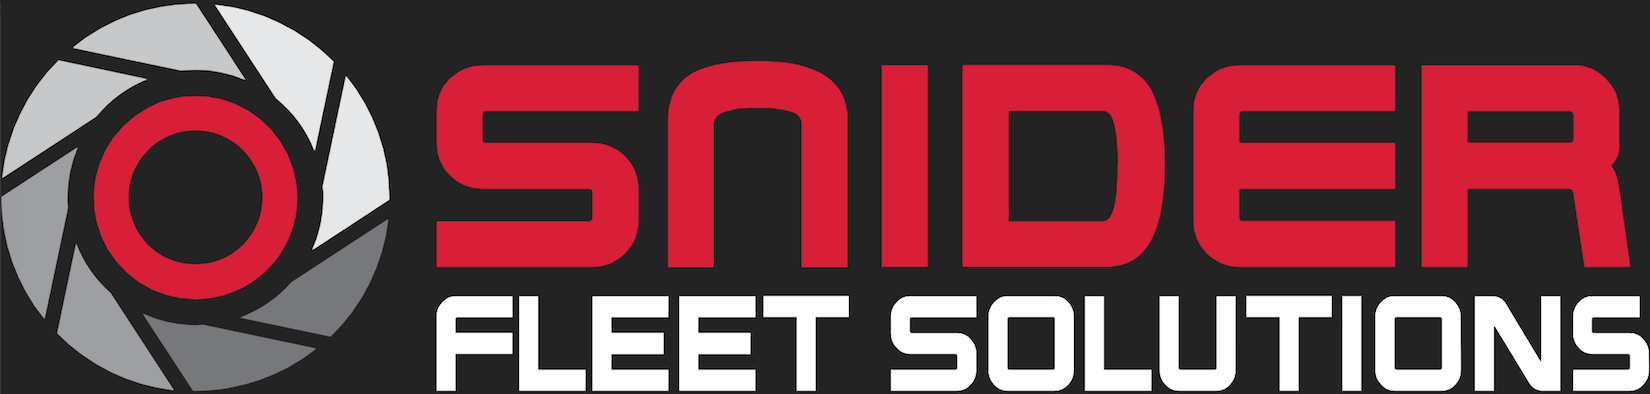 Snider Logo - Snider Fleet Solutions Tires and Mechanical Service